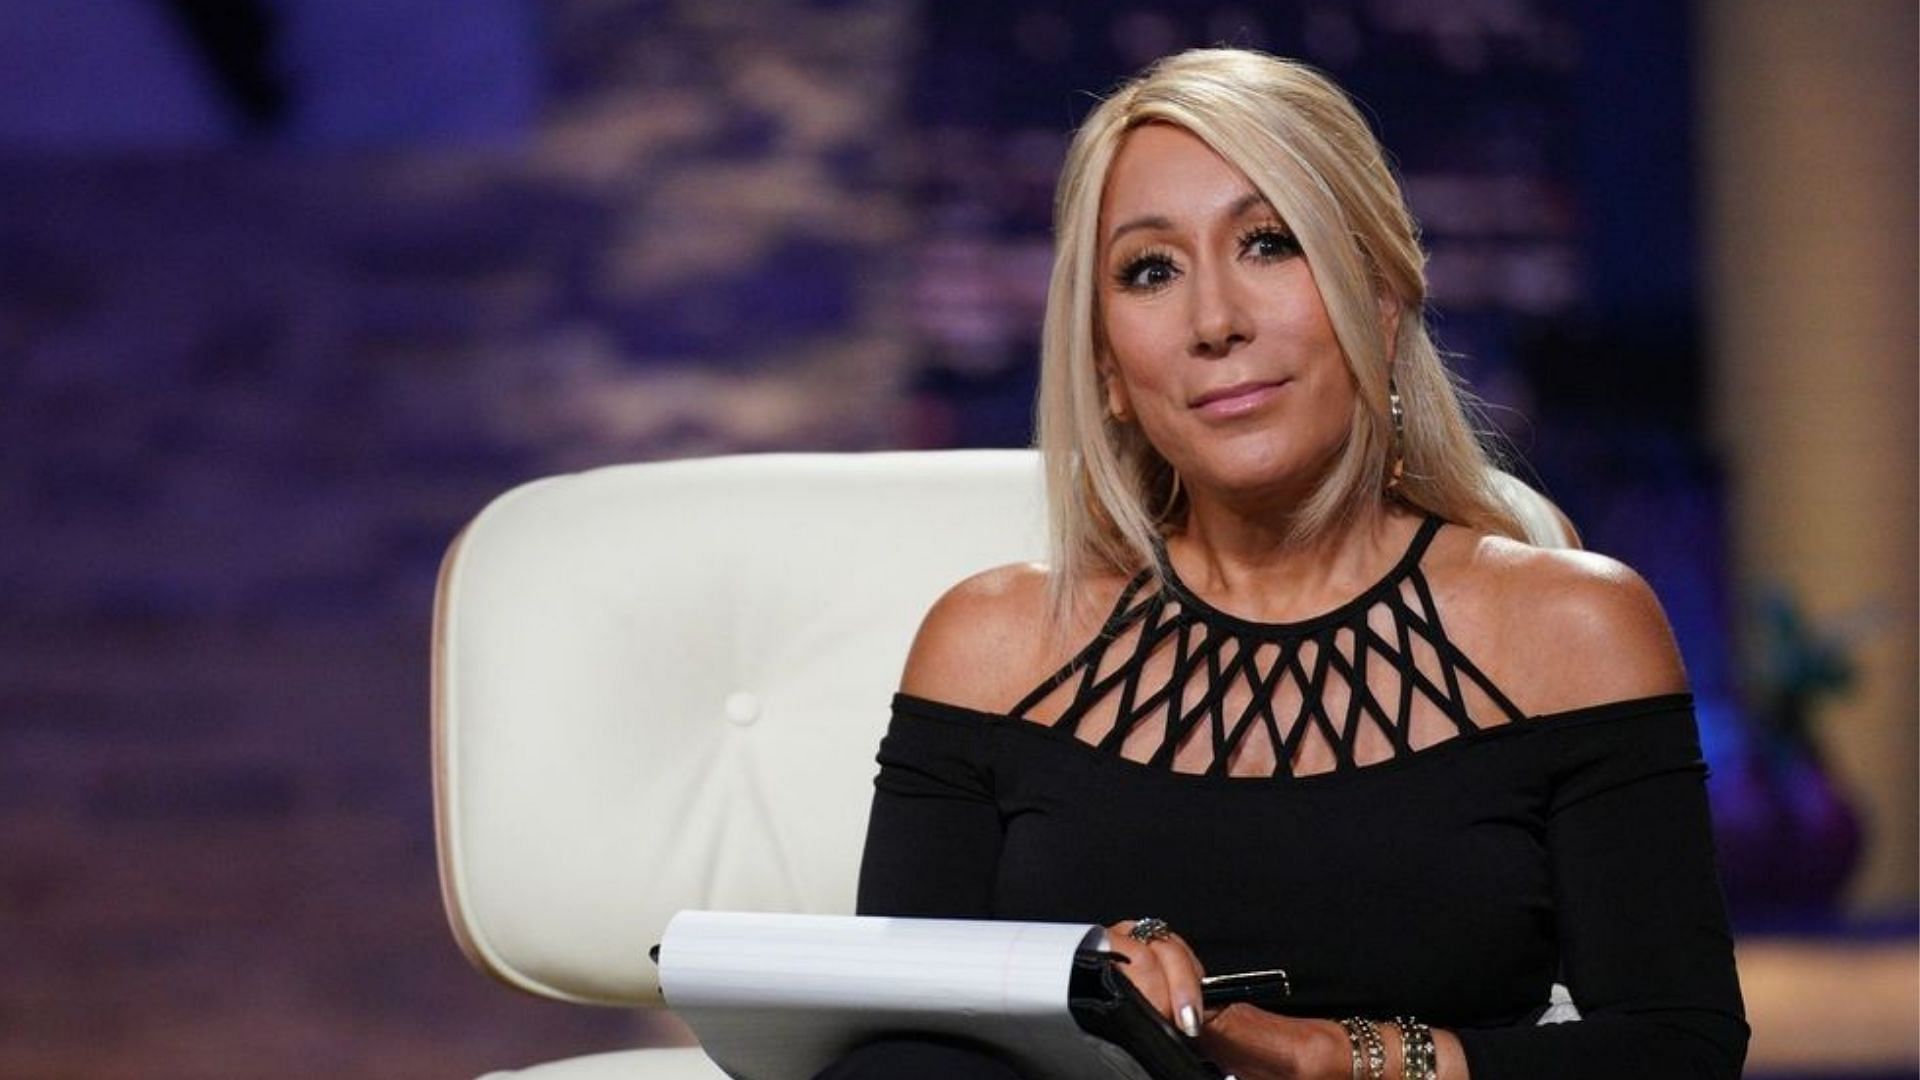 Stella Valle: What Happened To The Jewelry Brand After Shark Tank?